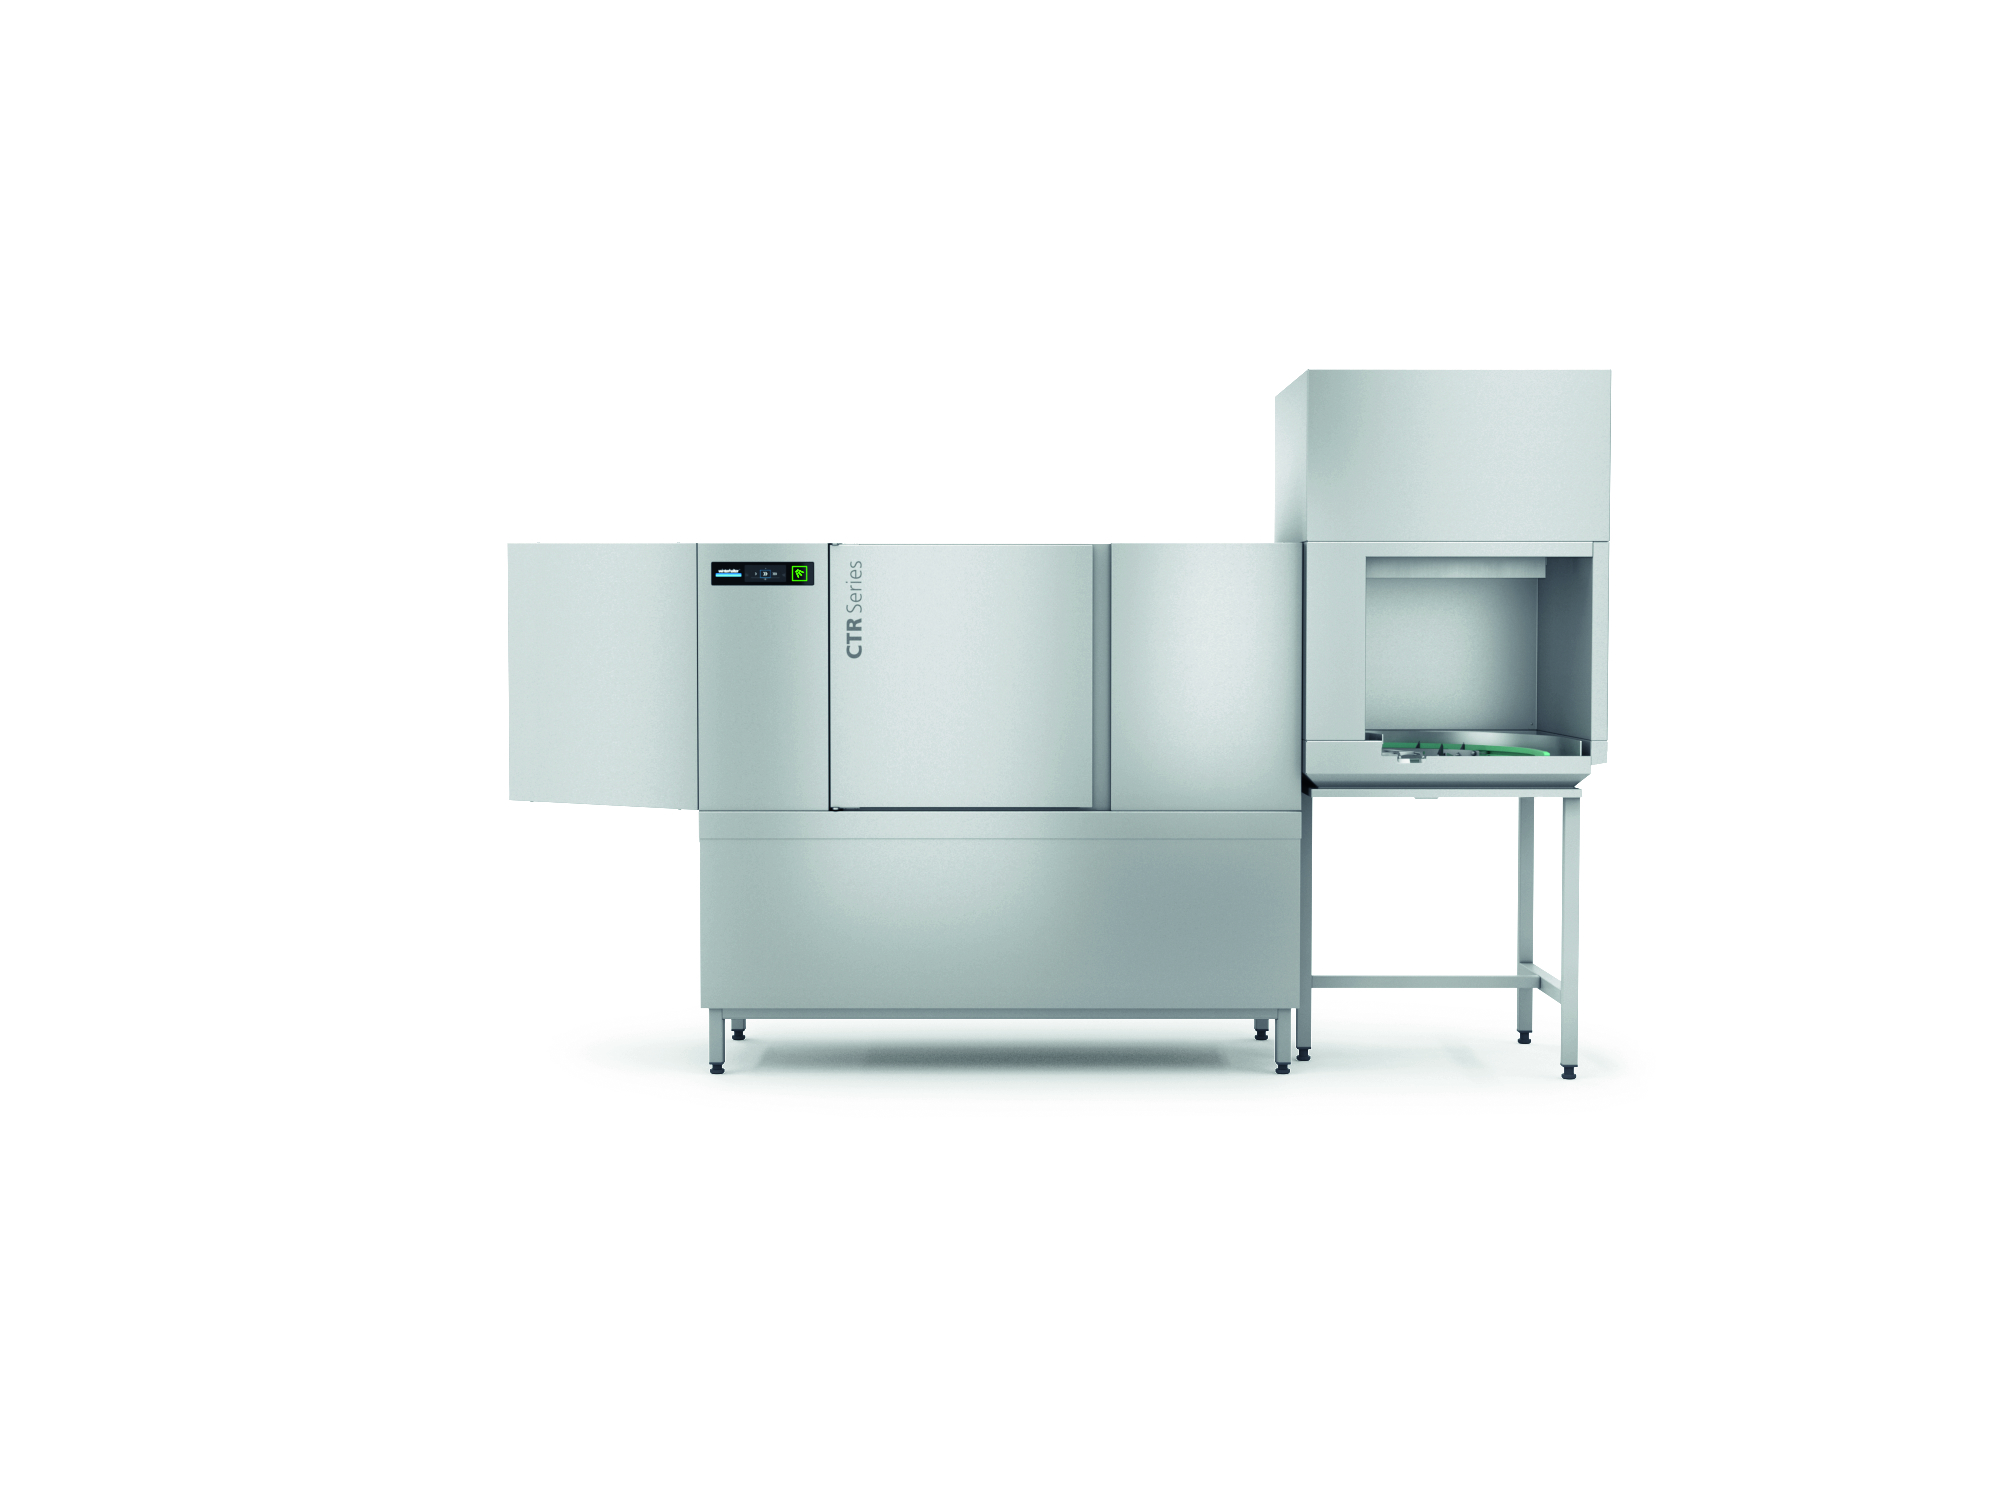 Compact, customisable and quick: Winterhalter’s new CTR dishwasher